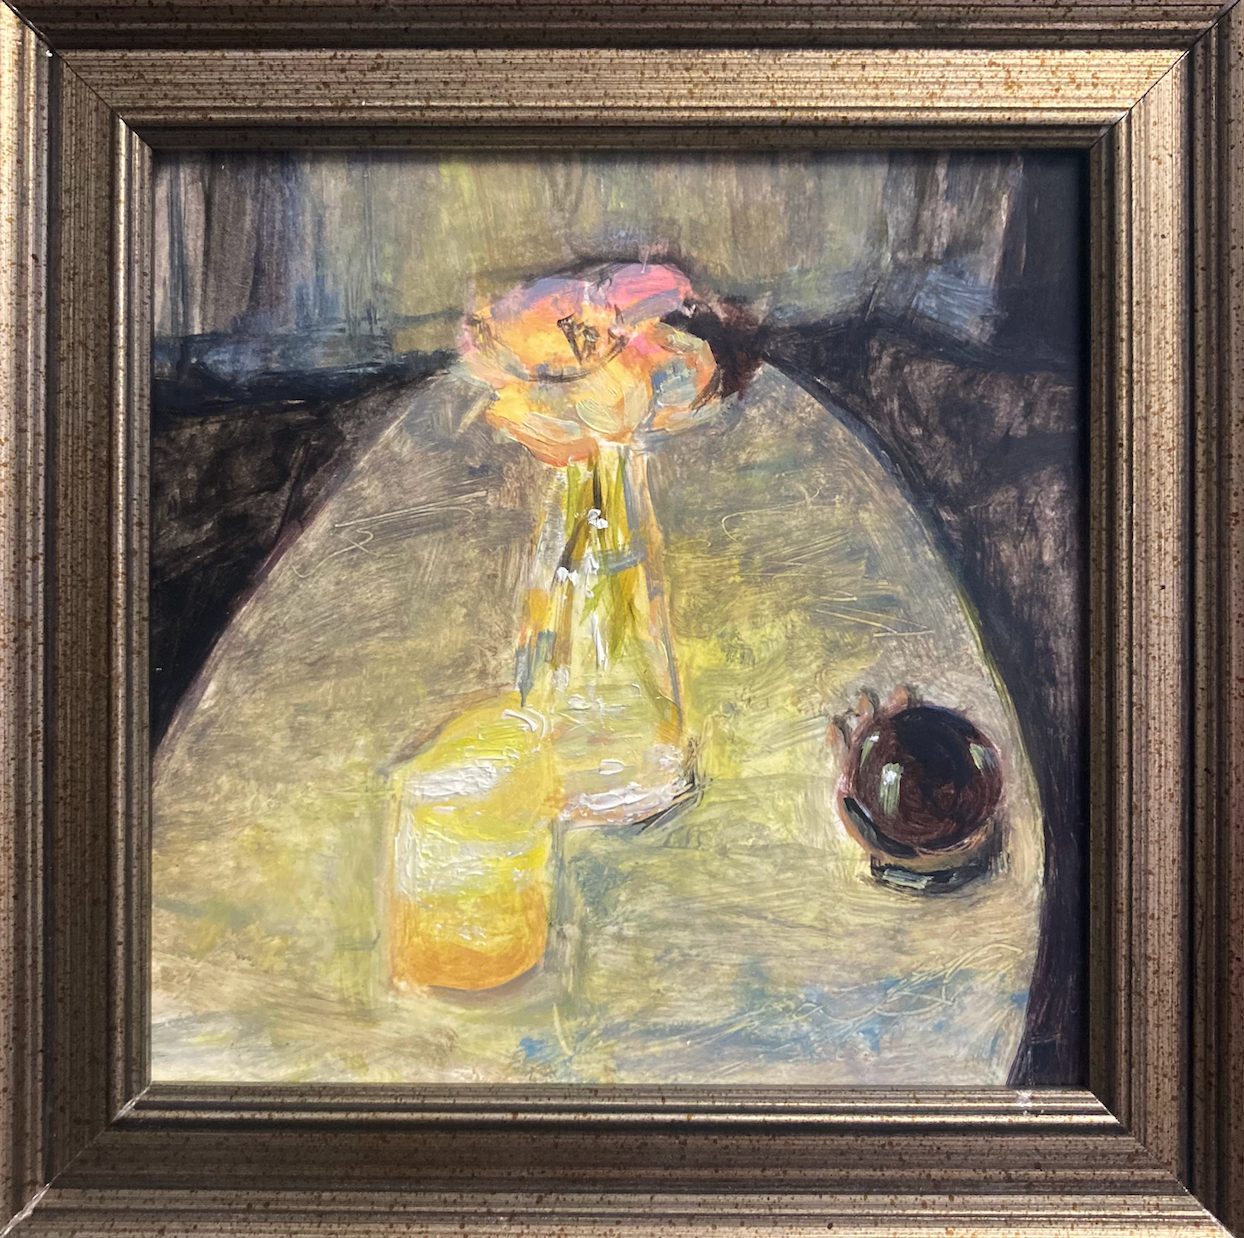 Oil painting of flowers in vase and drinks on table in yellow and gray shades titled 'Low Light' by E. E. Jacks with painted gold frame